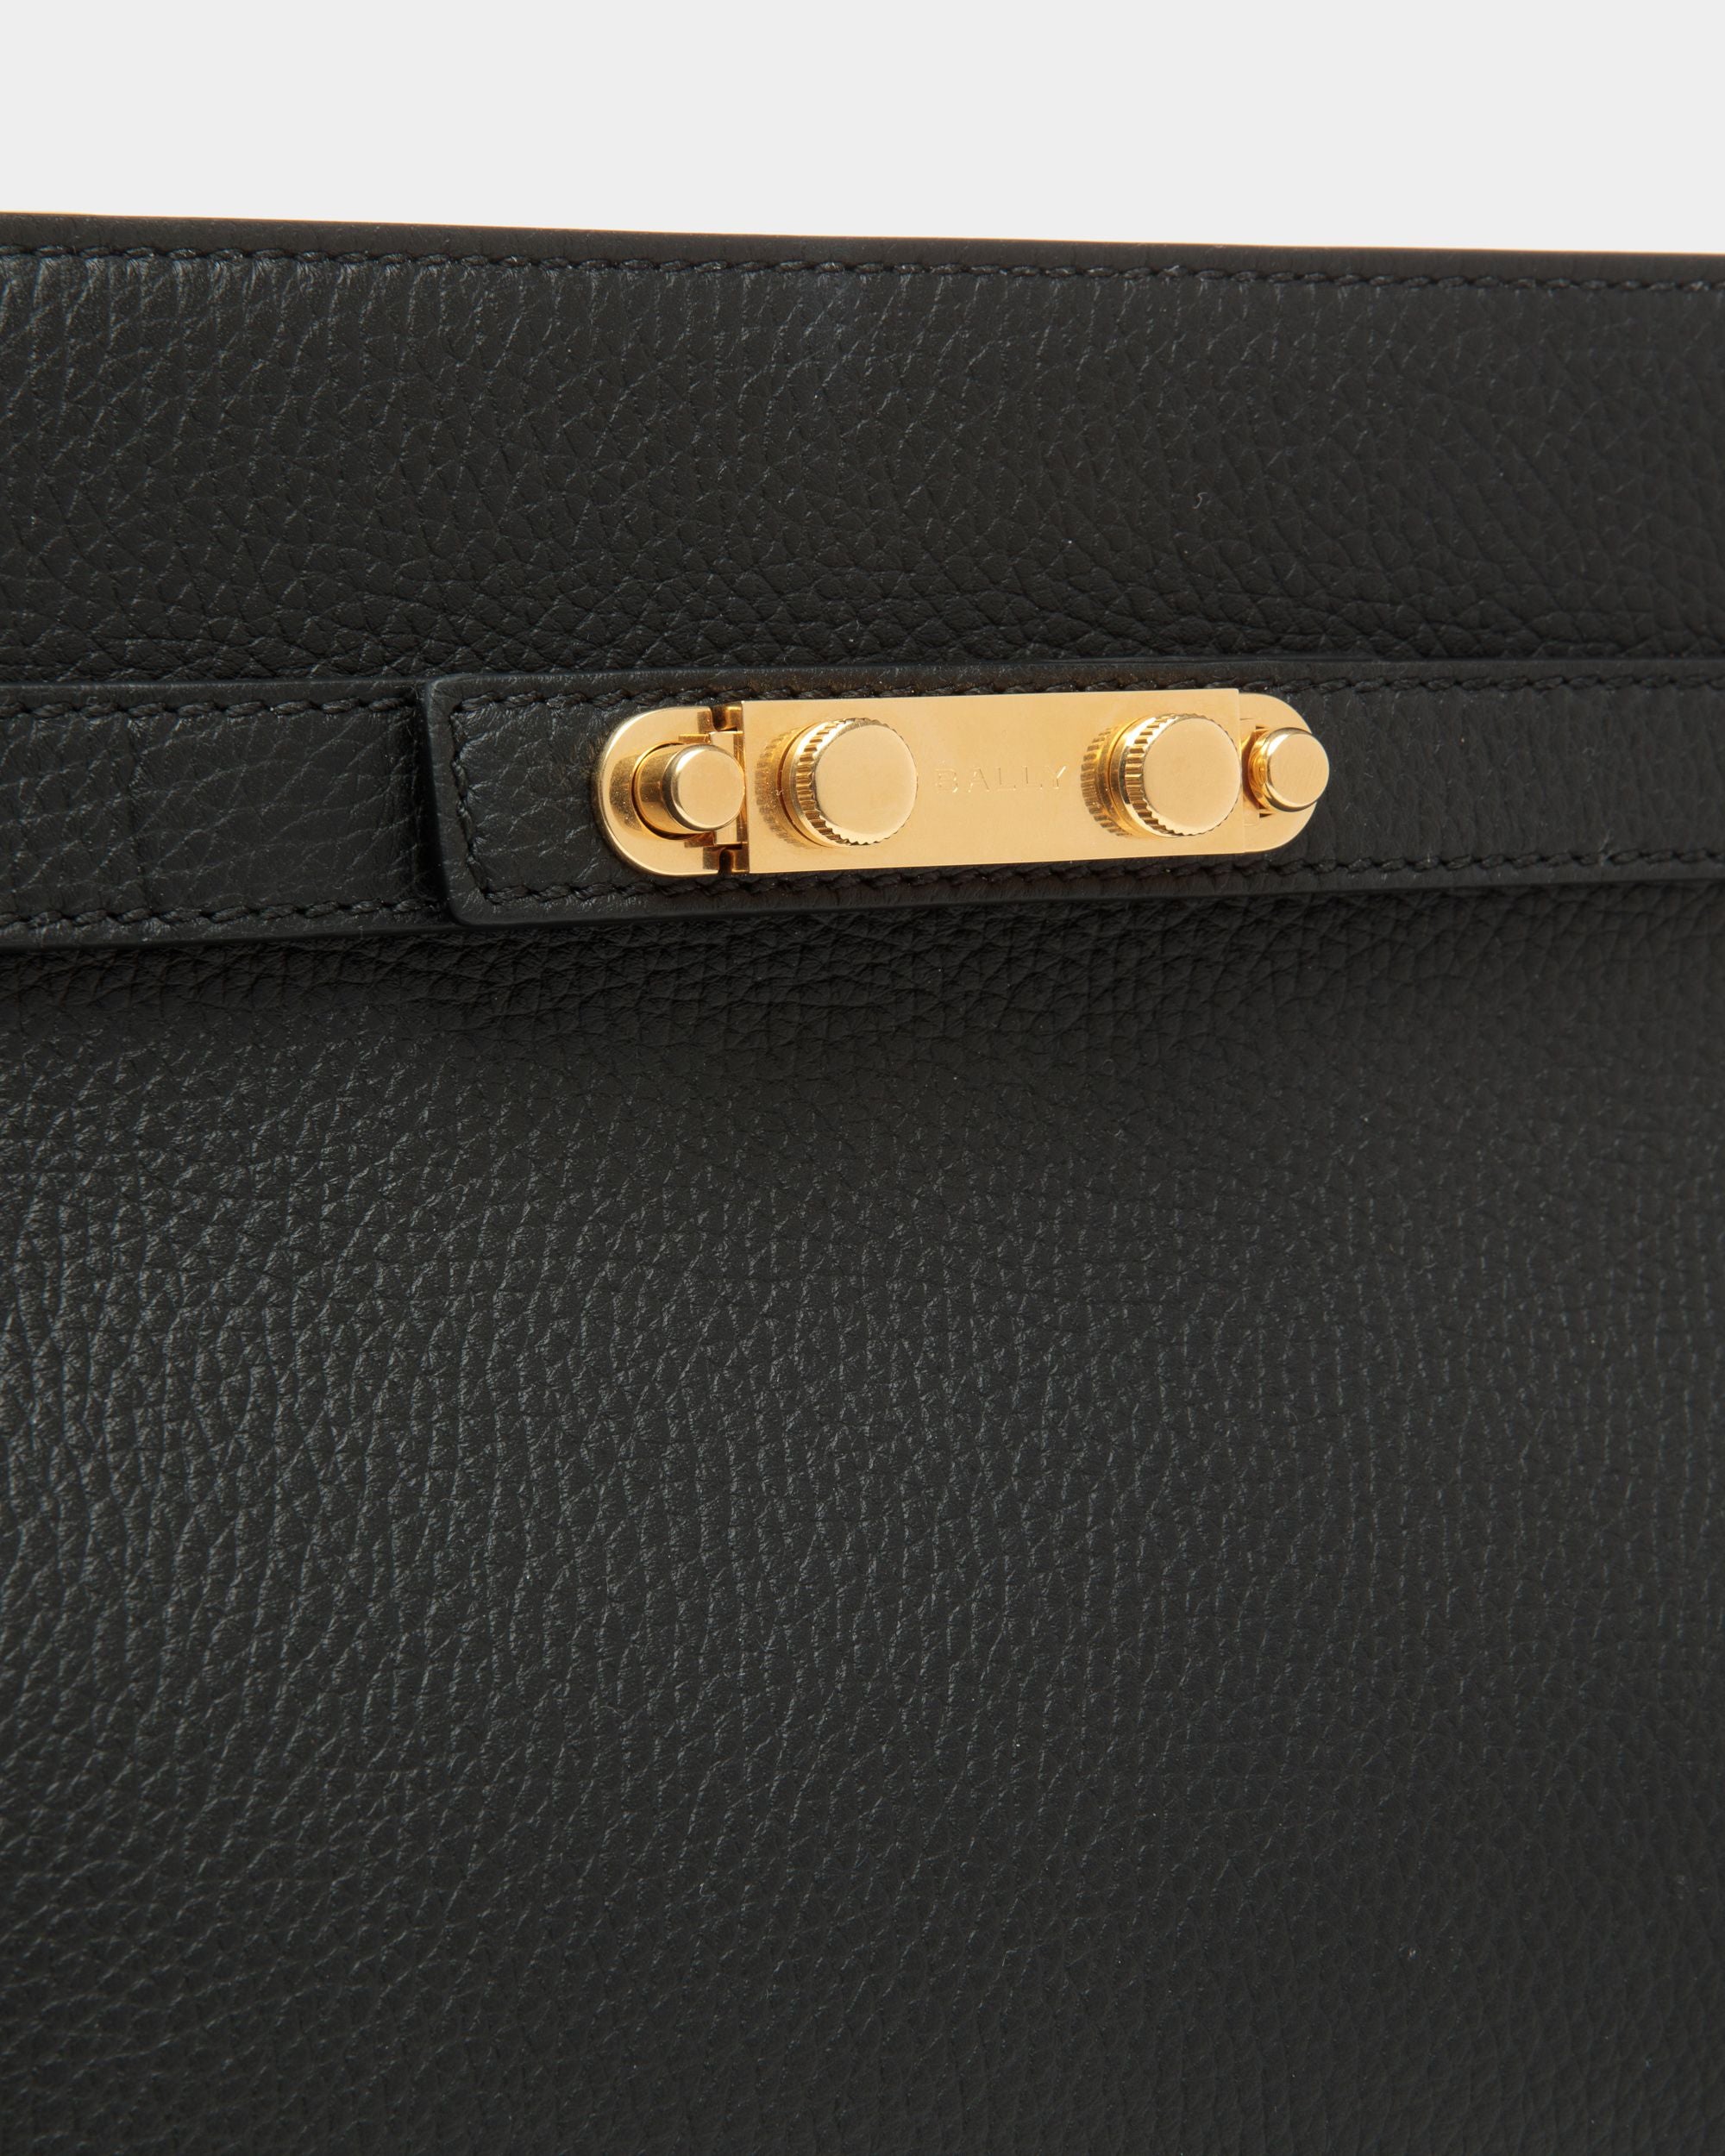 Carriage | Women's Shoulder Bag in Black Grained Leather | Bally | Still Life Detail